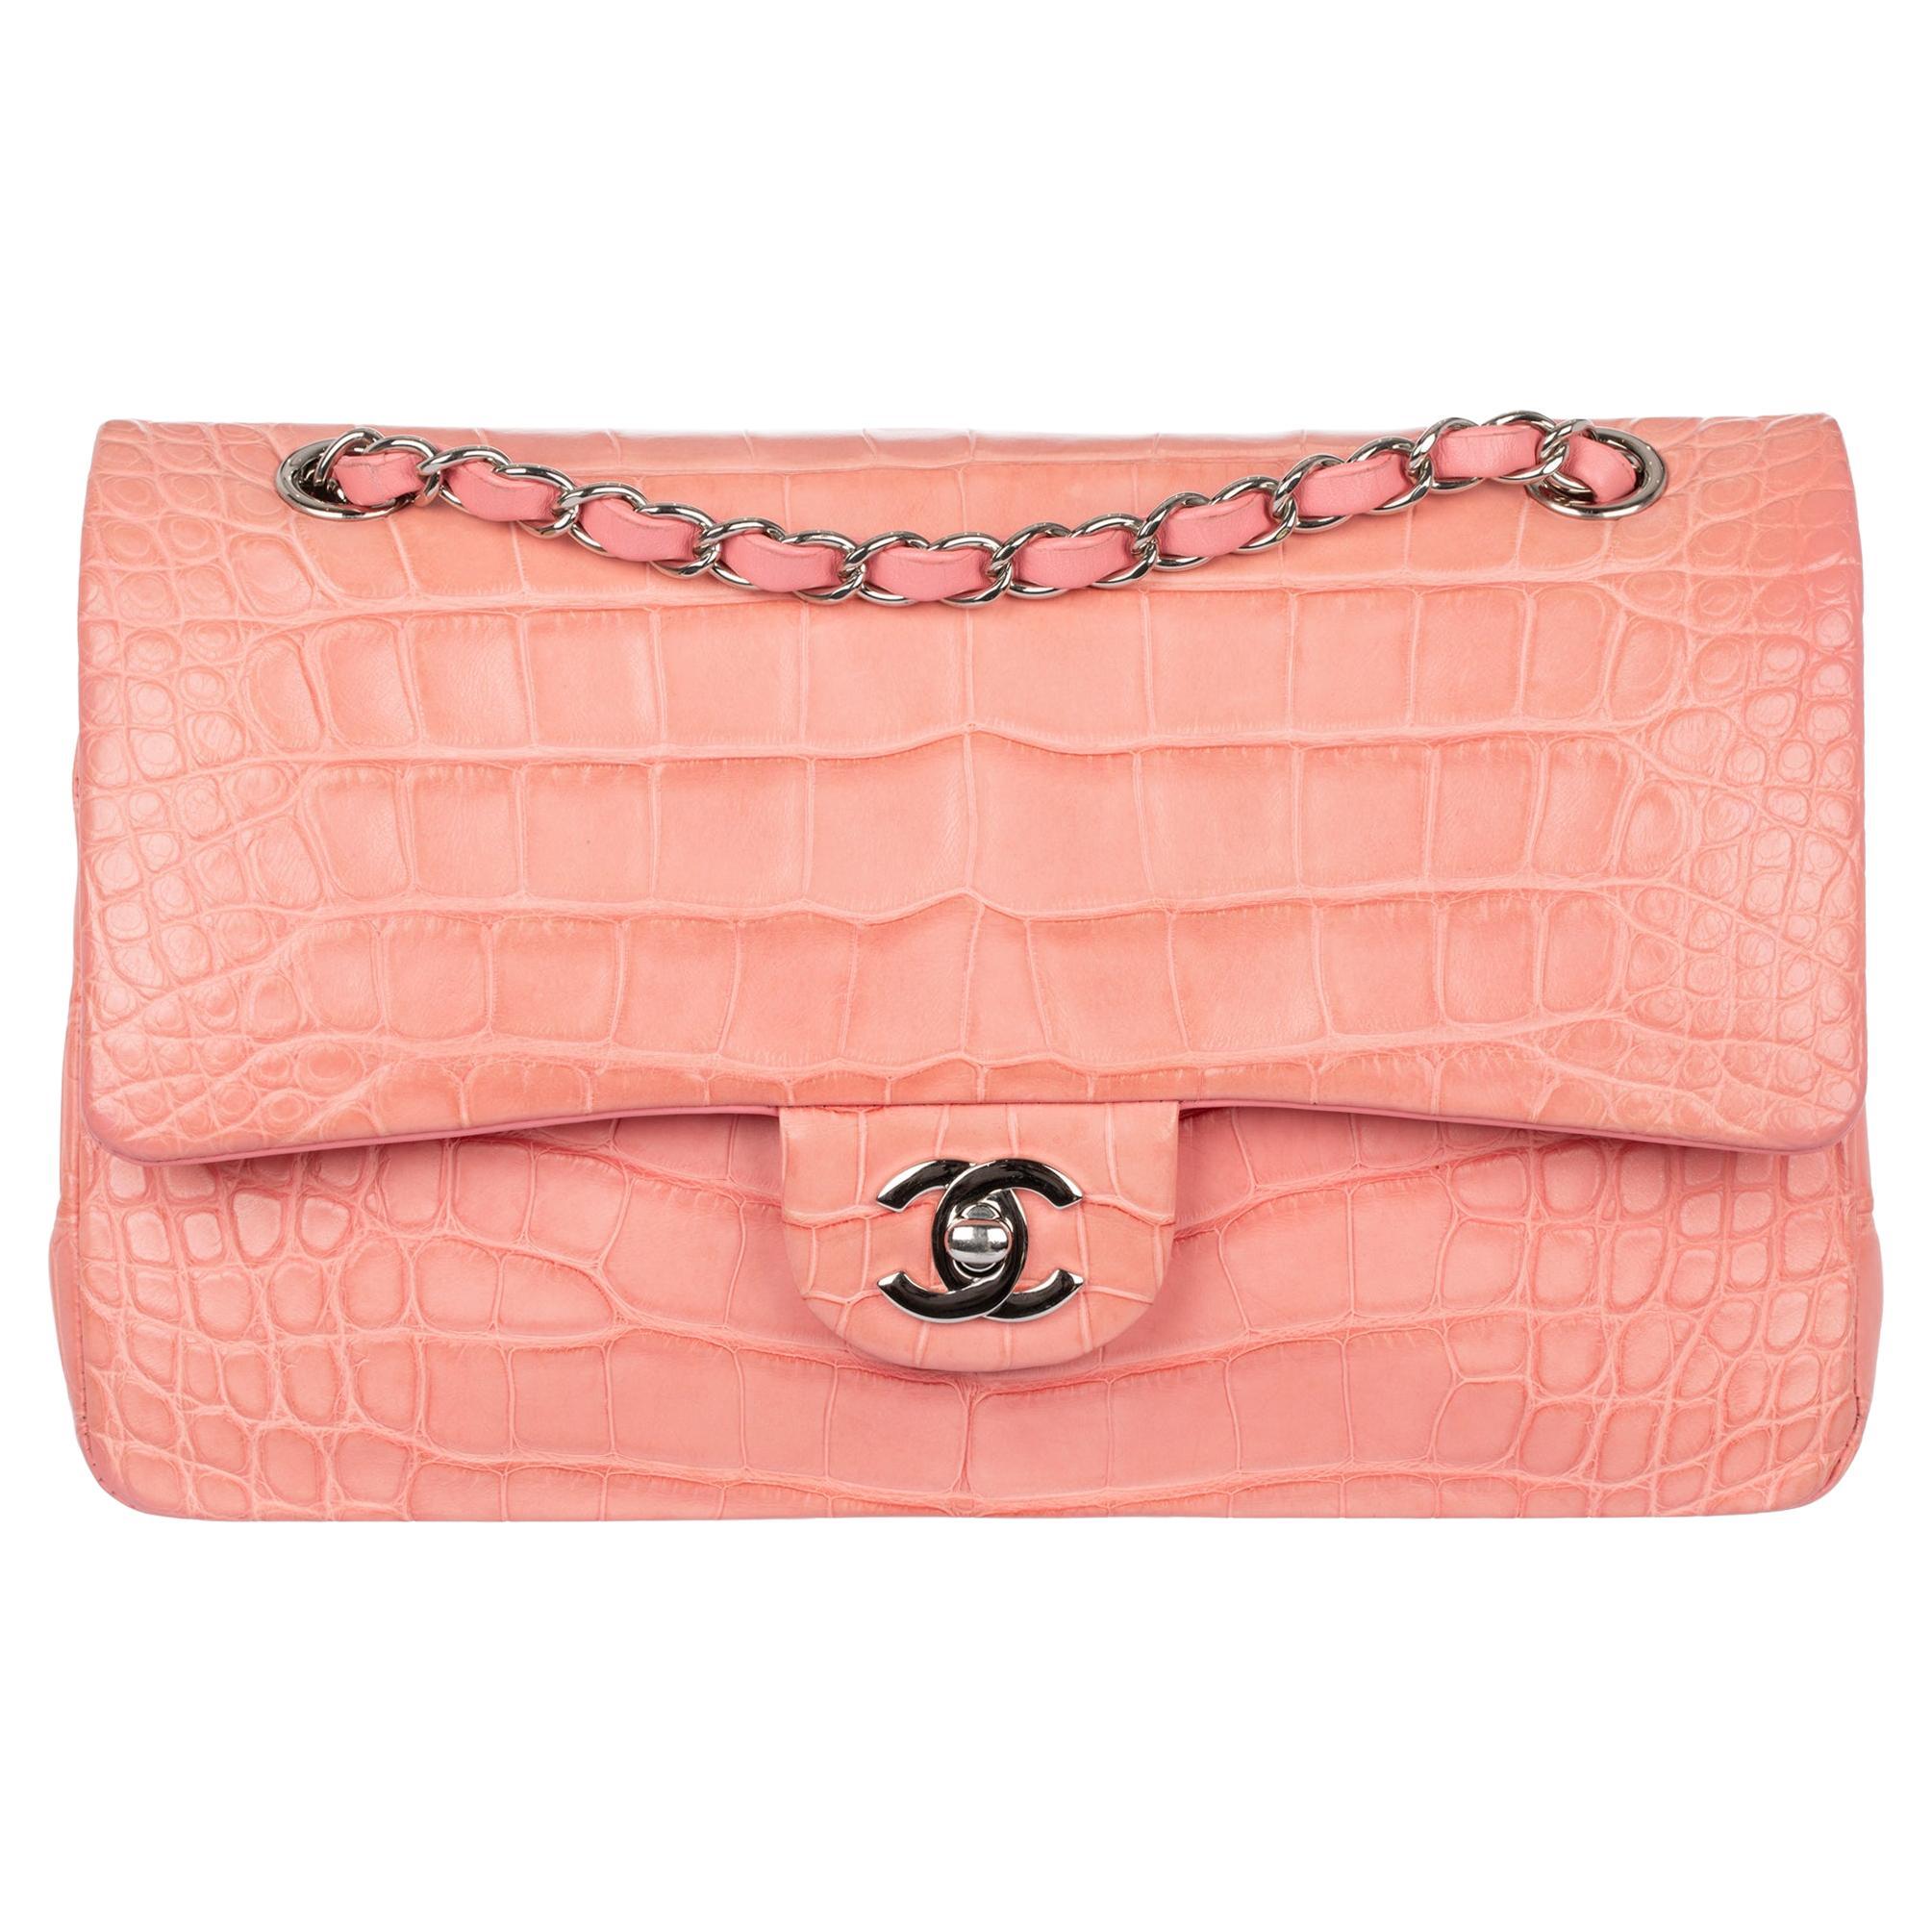 Chanel Medium Double Classic Flap Bag Coral Pink Matte Crocodile Leather Silver